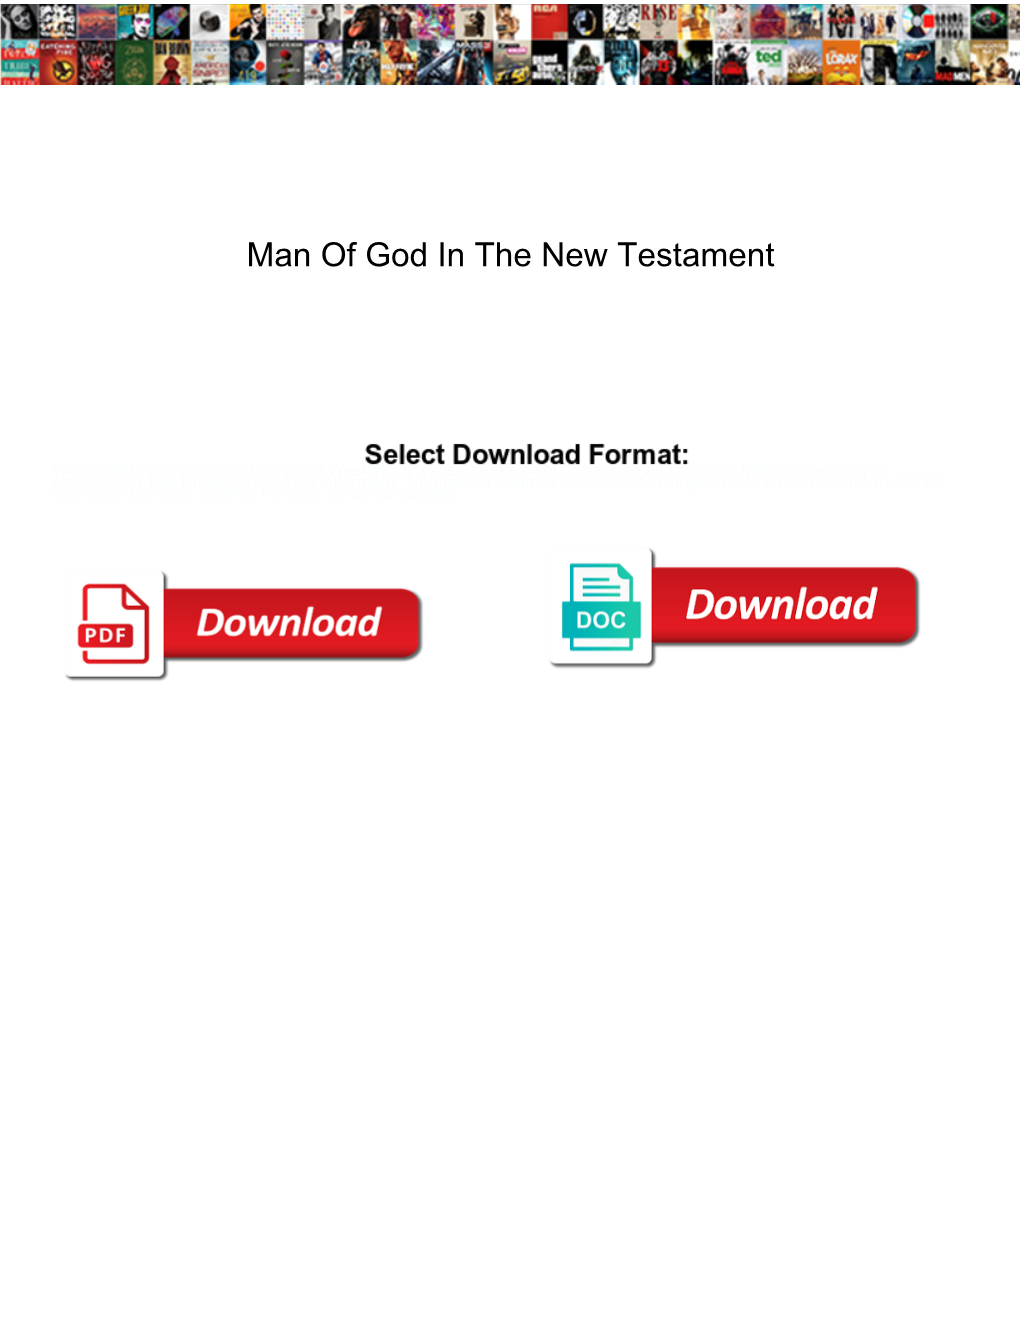 Man of God in the New Testament